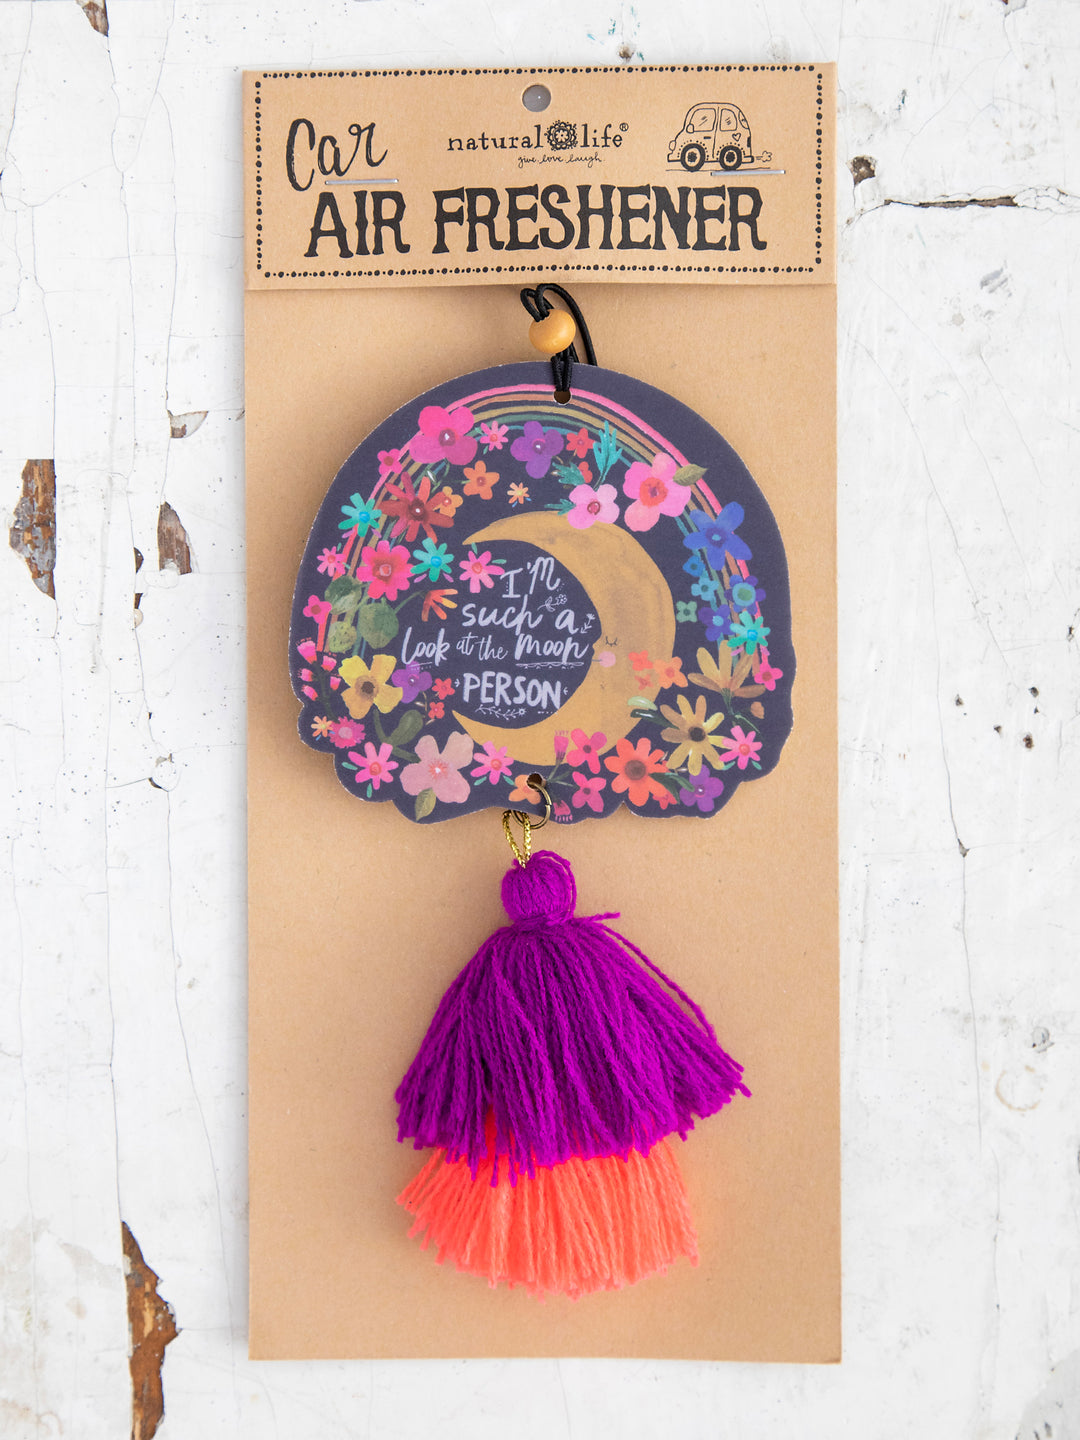 Air Freshener - Look at the Moon Person